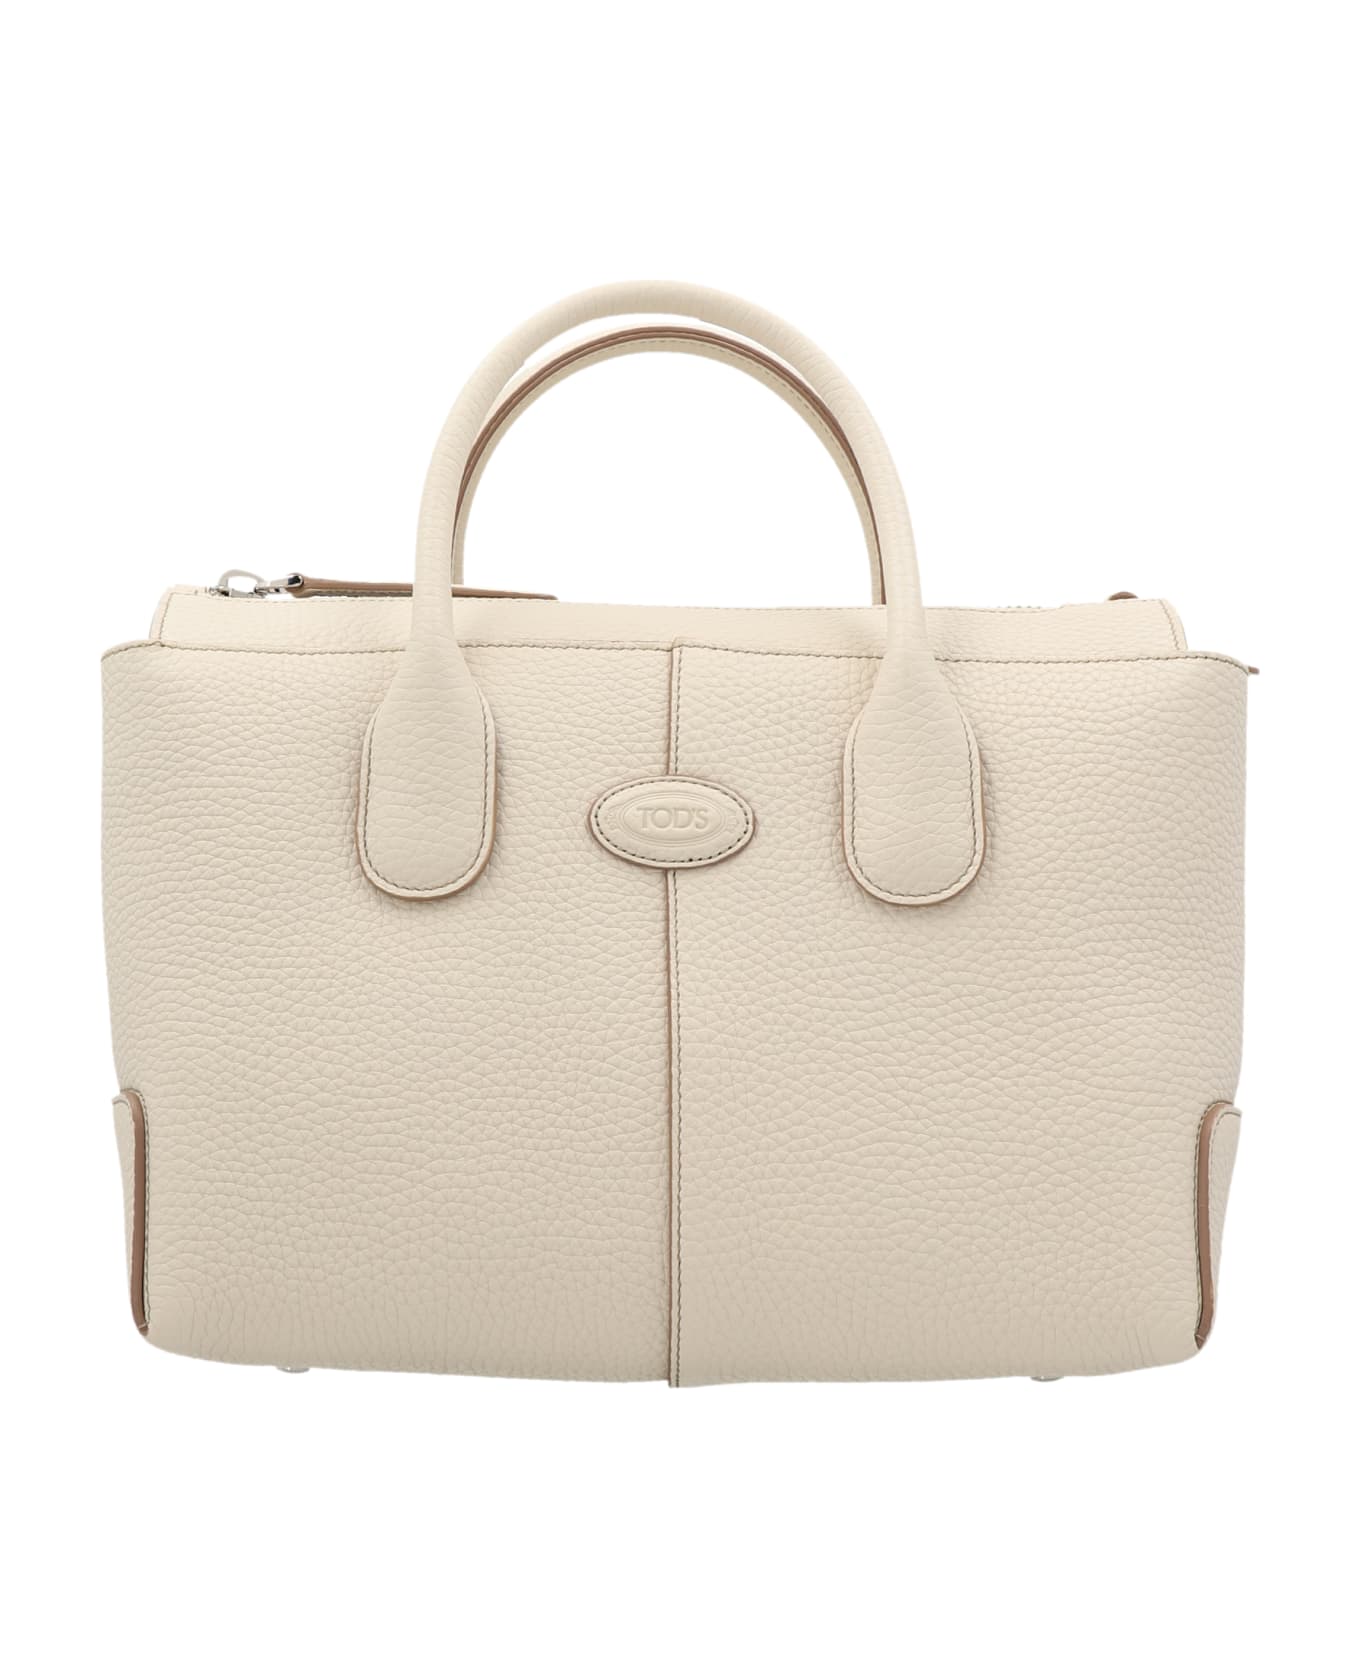 Tod's Di Smooth Leather Tote Bag - Ecru トートバッグ